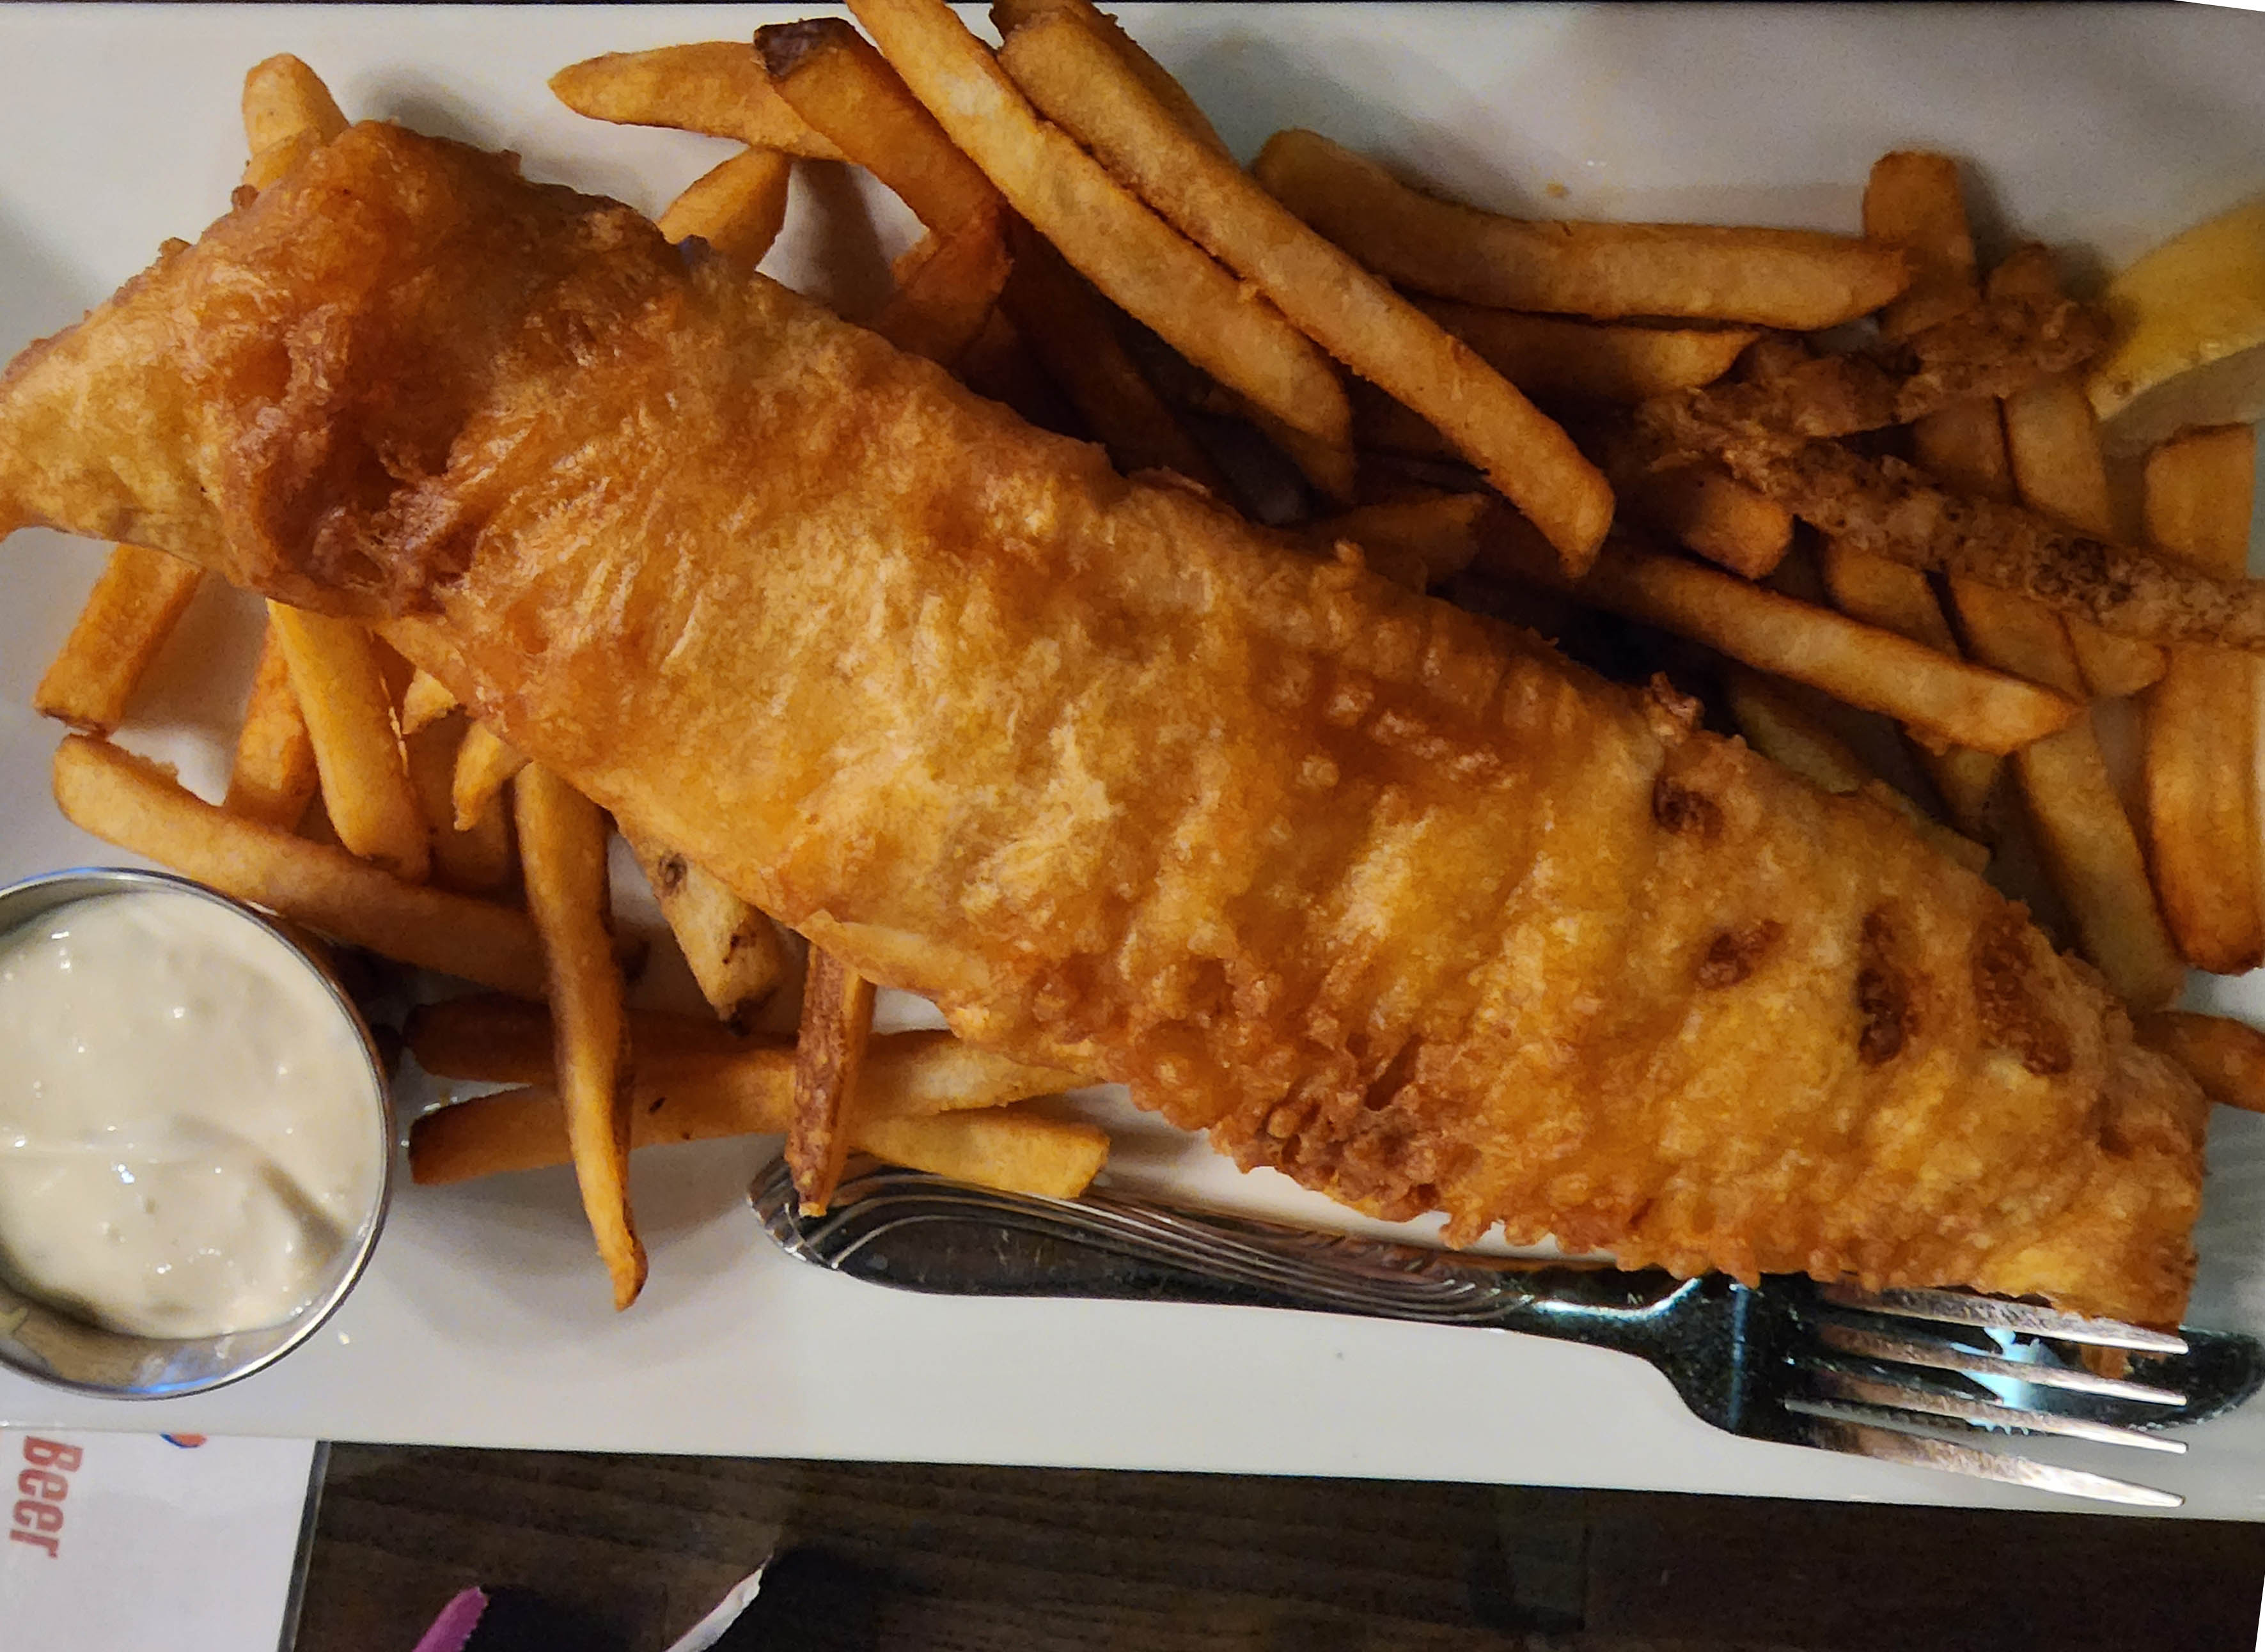 absolutely enormous plate of fish and chips